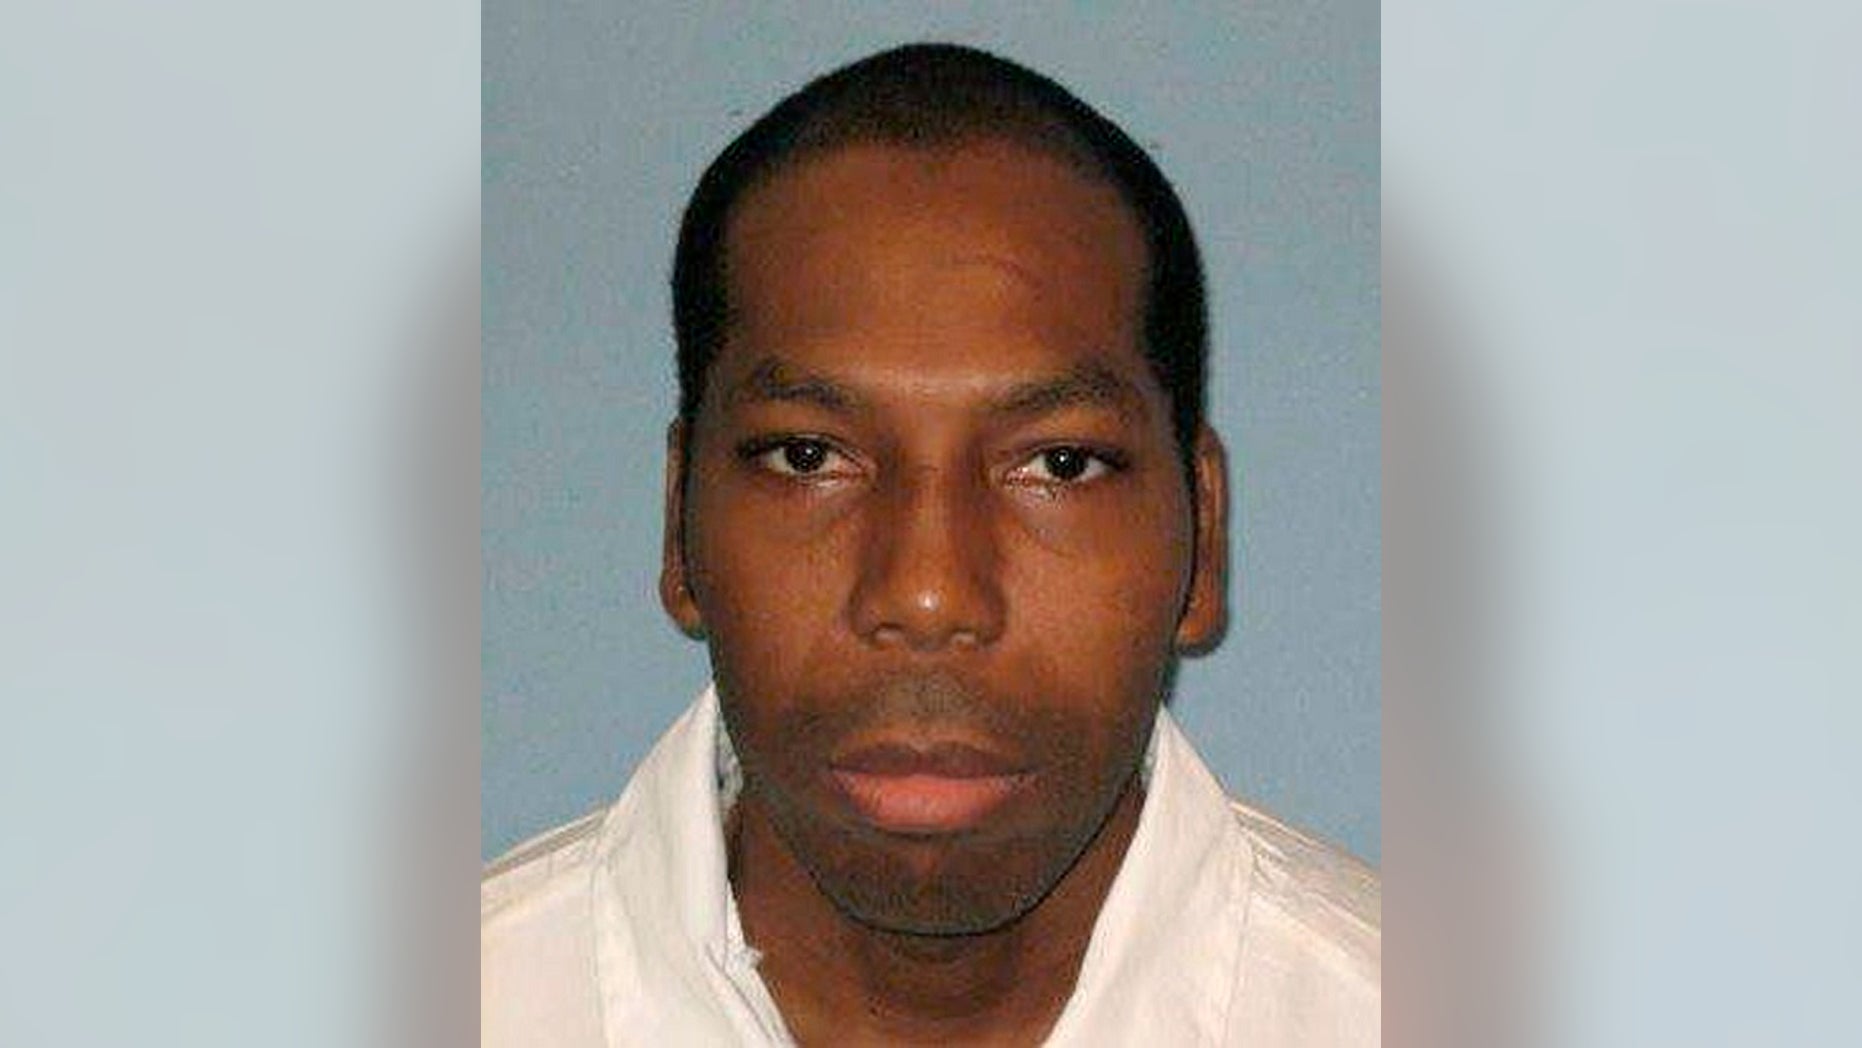   FILE - This undated photo from the Alabama Correctional Services Department shows Detainee Dominique Ray. (Alabama Department of Corrections via AP, File) 